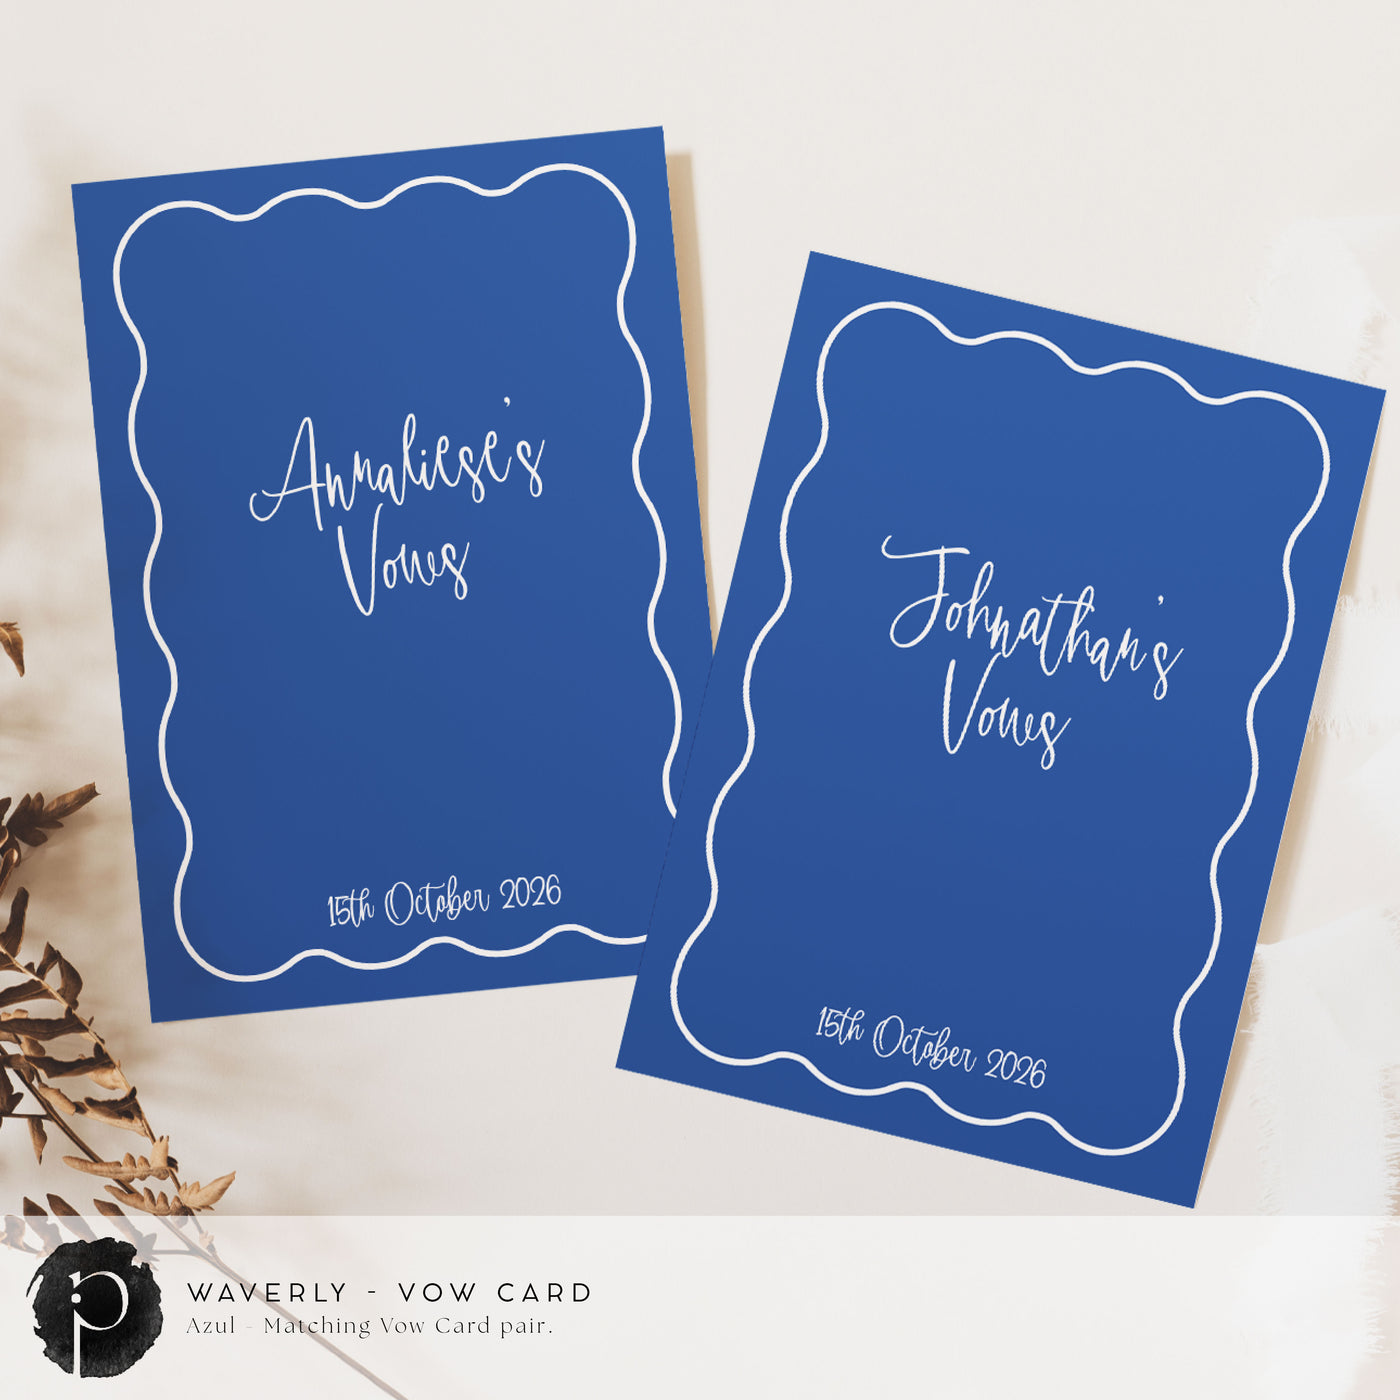 A pair of vow cards to write your wedding vows on in a modern retro wedding theme with white writing on an indigo blue or cobalt blue background